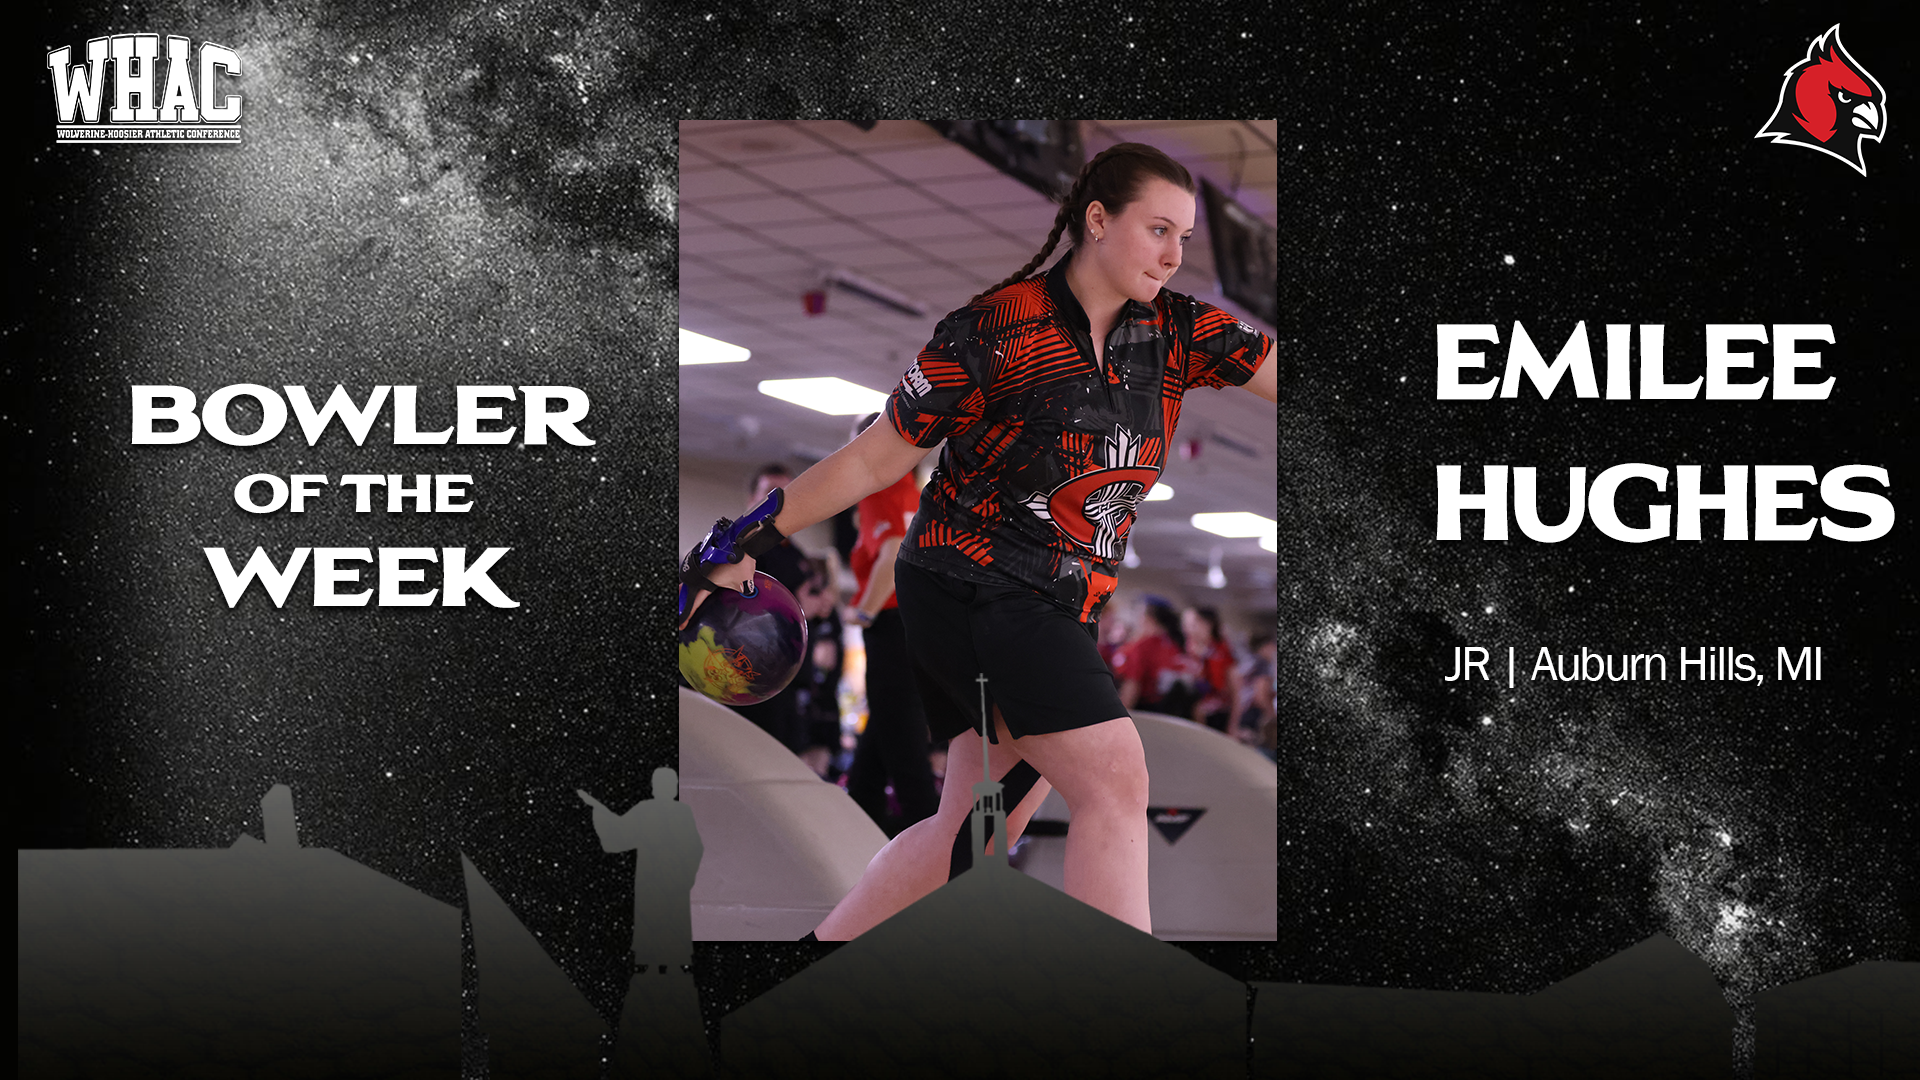 Emilee Hughes earns first WHAC Bowler of the Week of her career